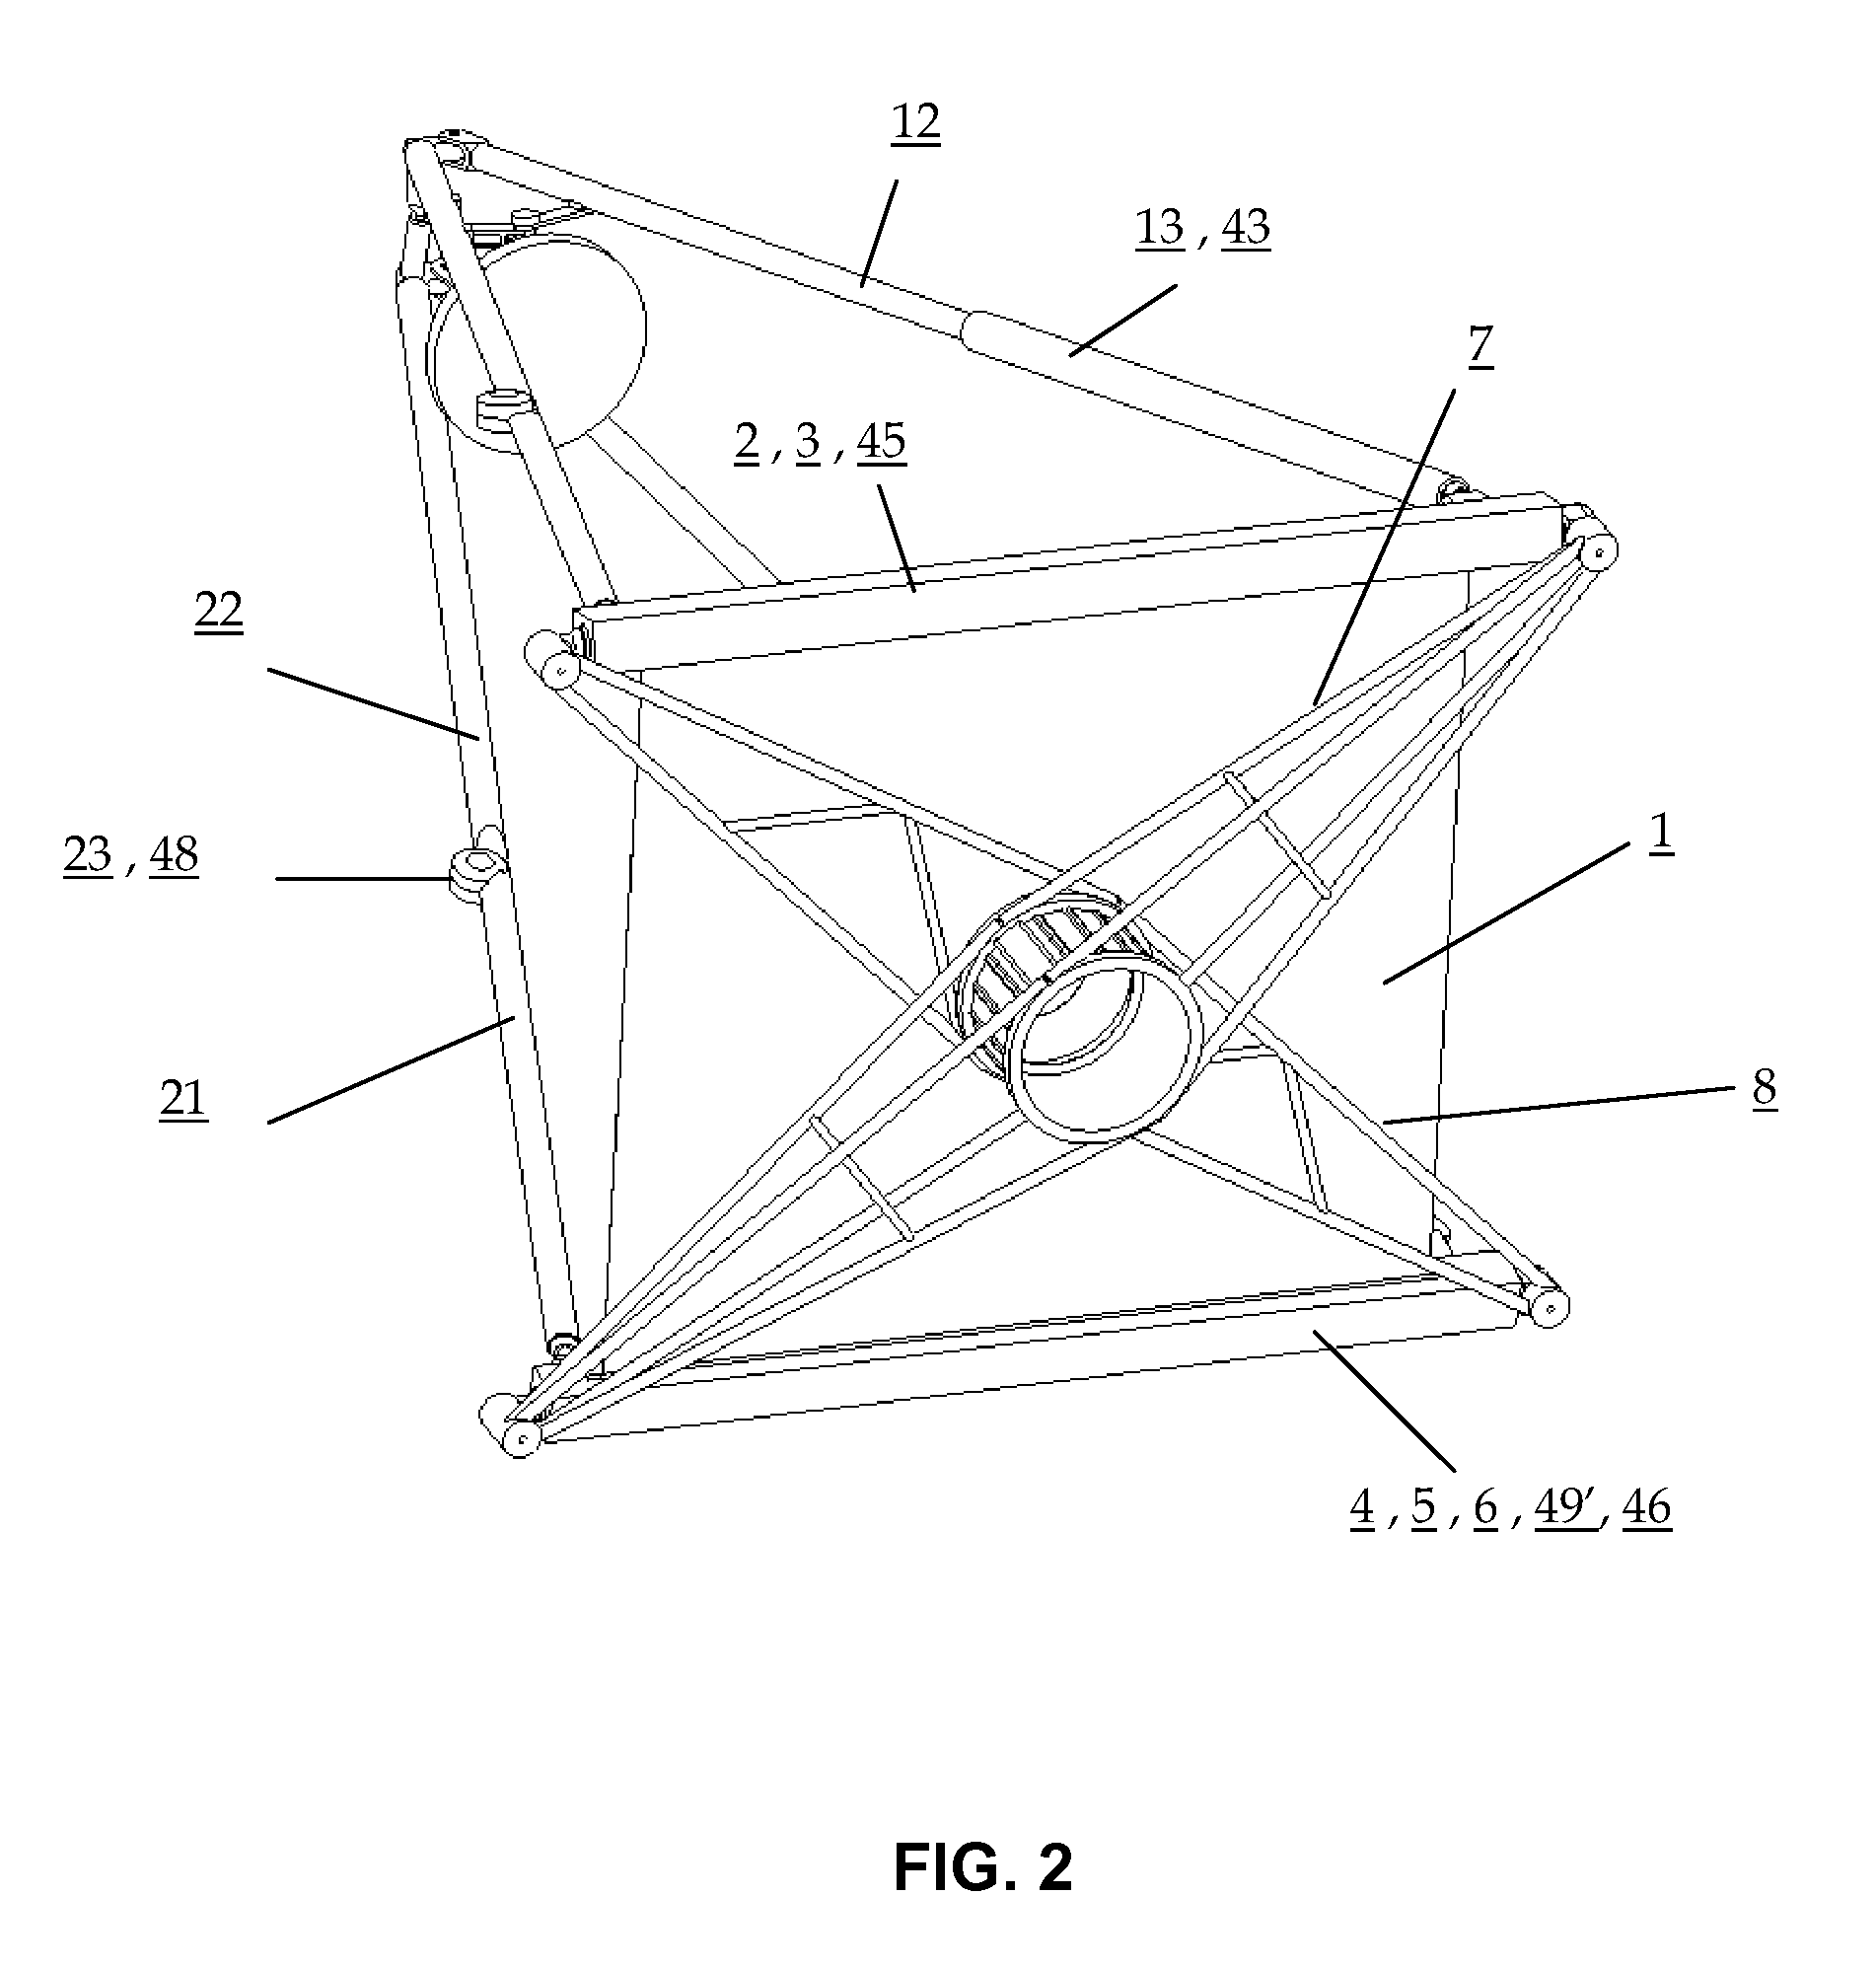 Deployable telescope having a thin-film mirror and metering structure